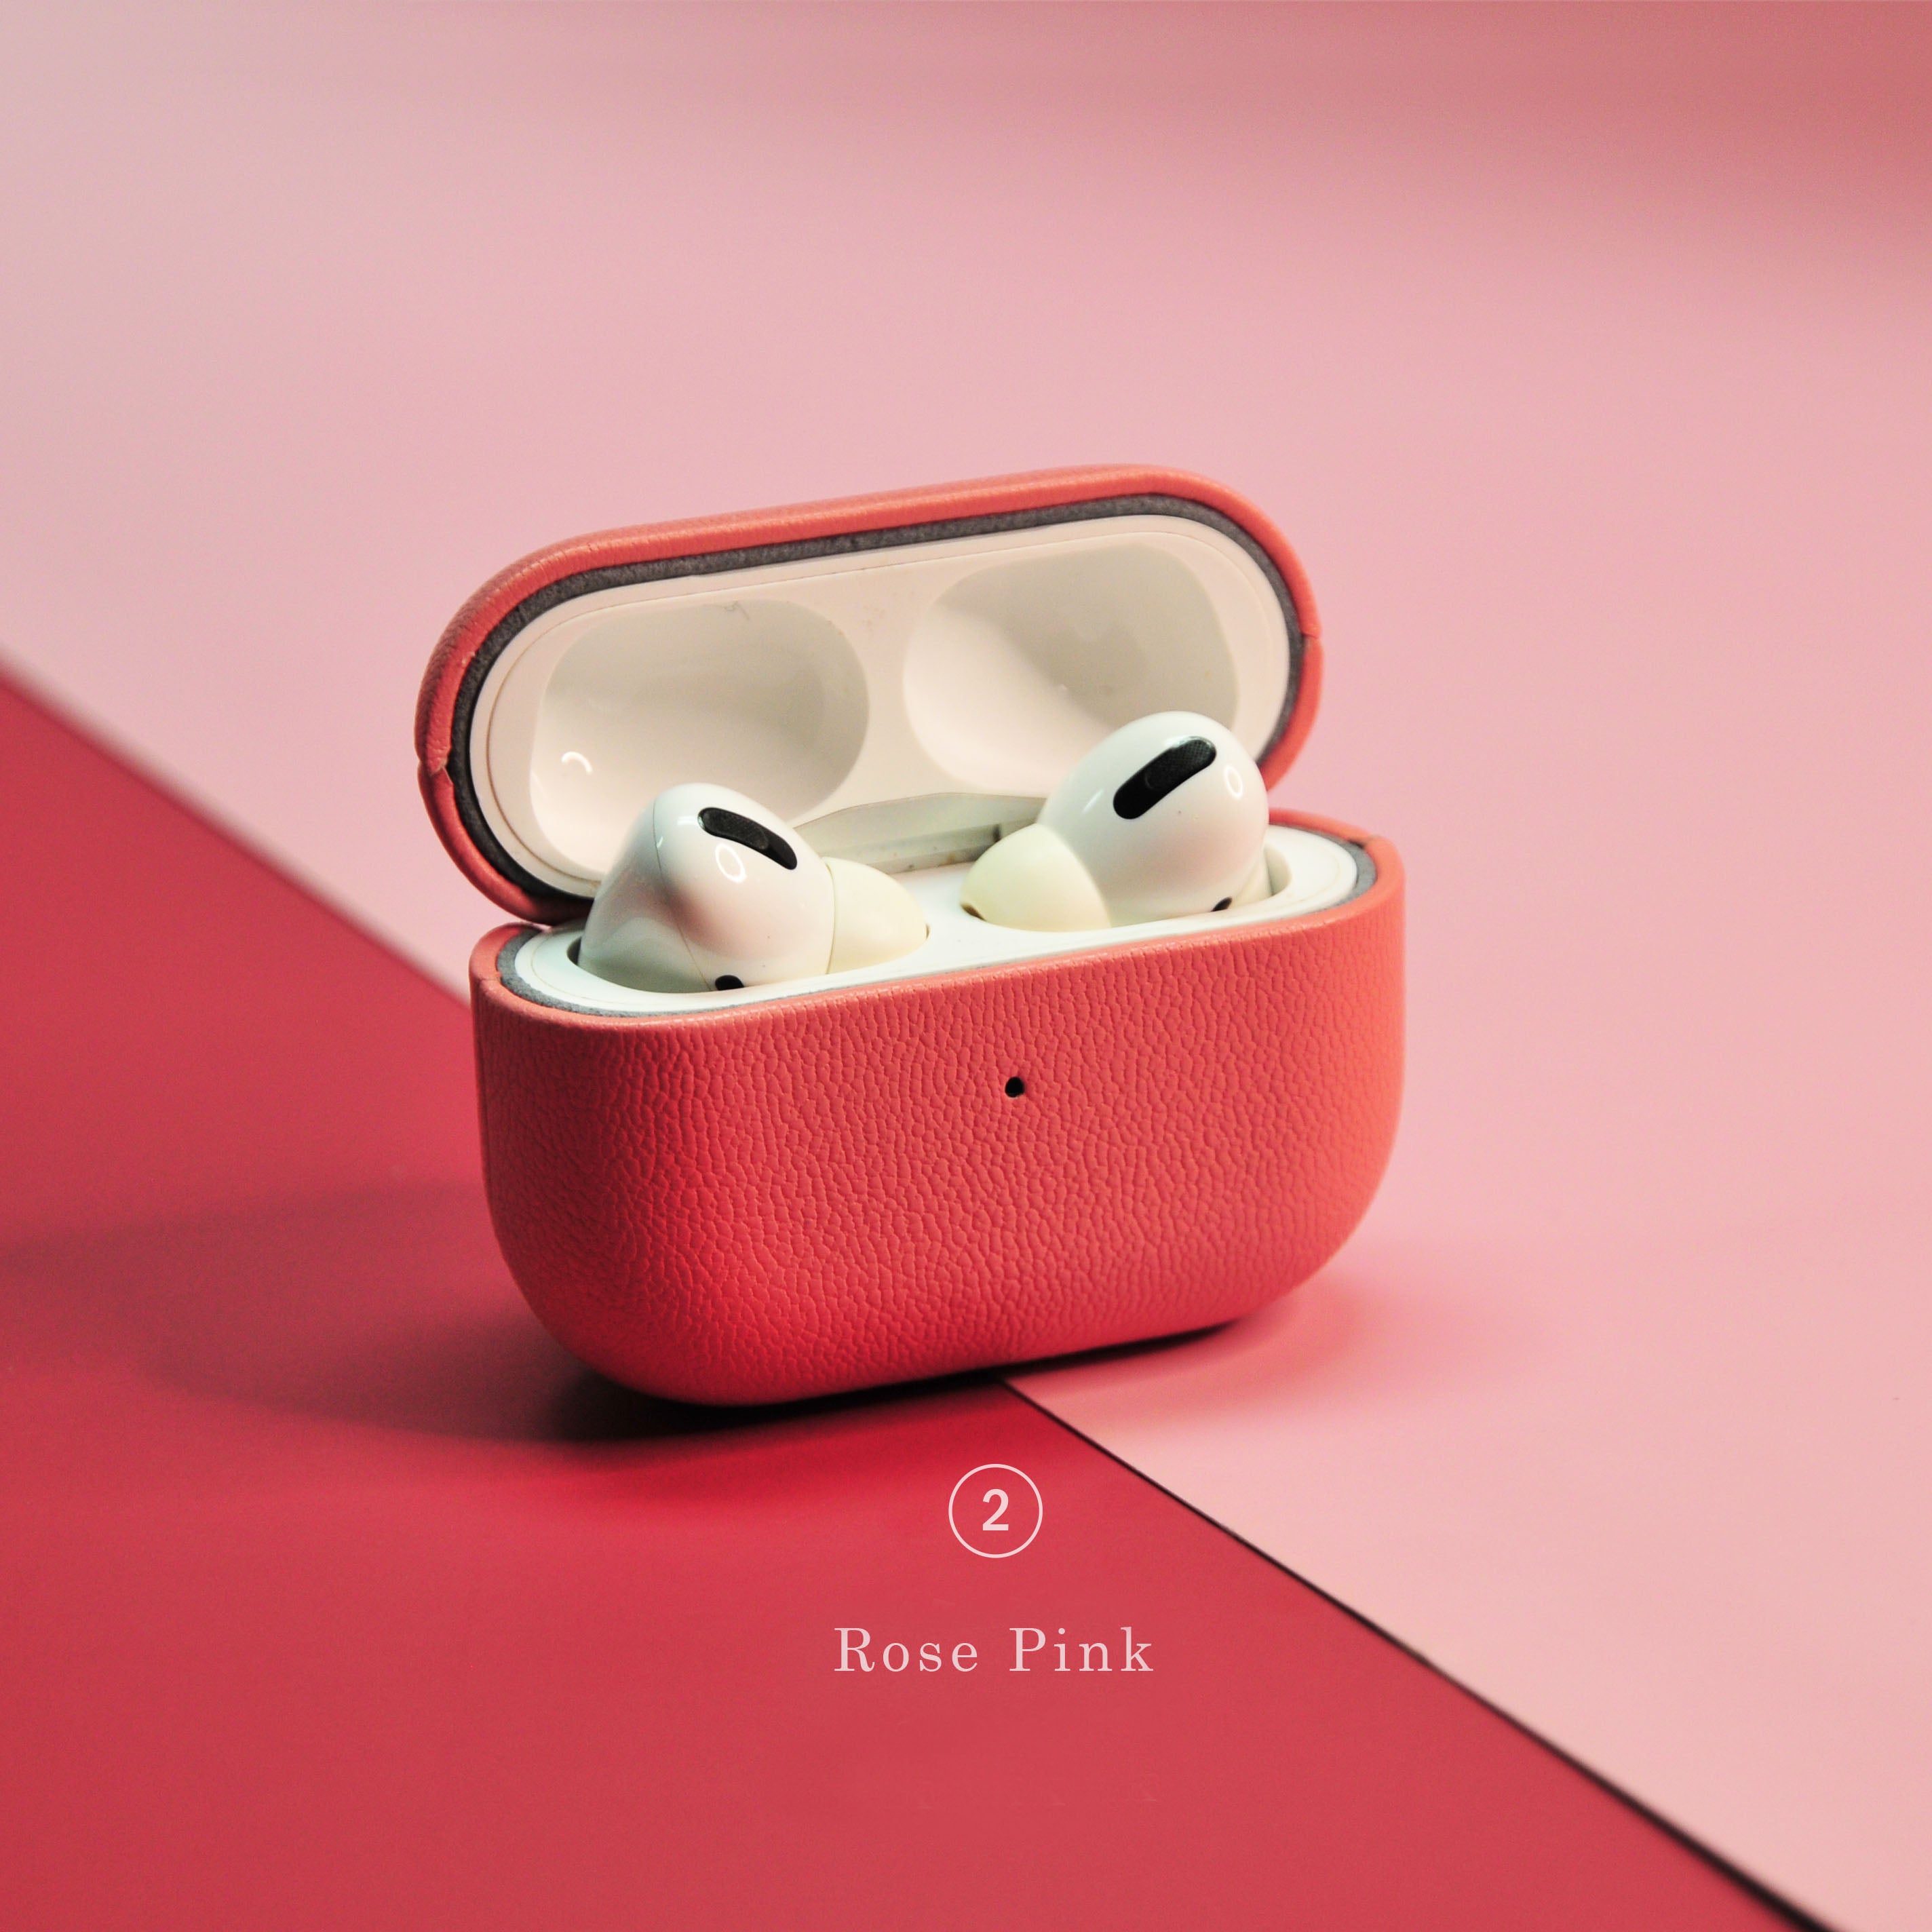 Rose Pink Leather AirPod Case